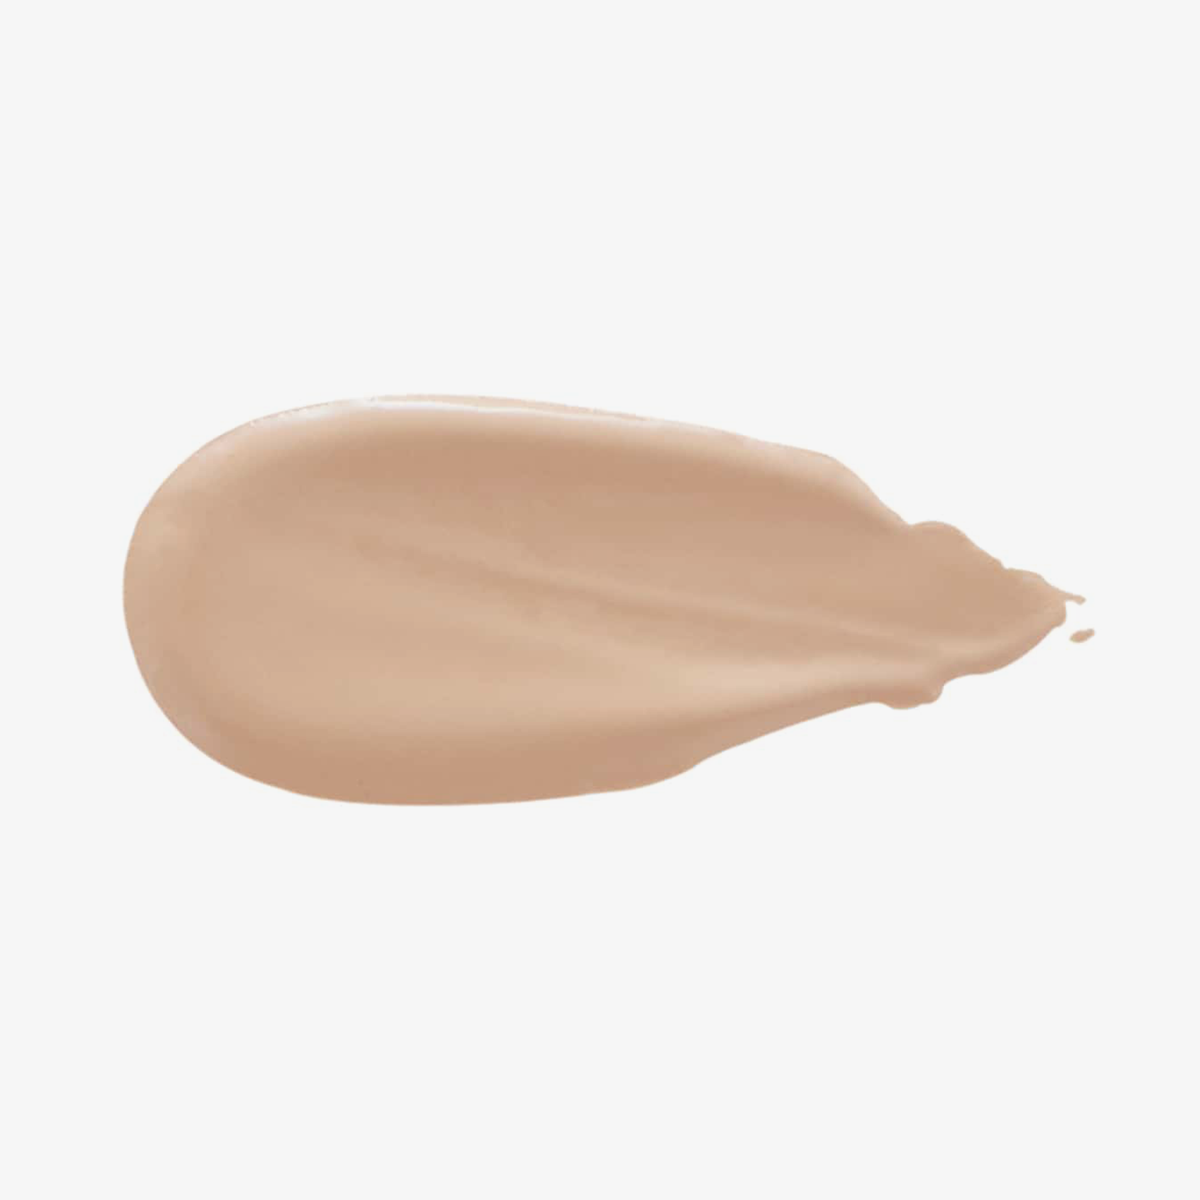 Bare It All™ 4-in-1 Skin-Perfecting Foundation